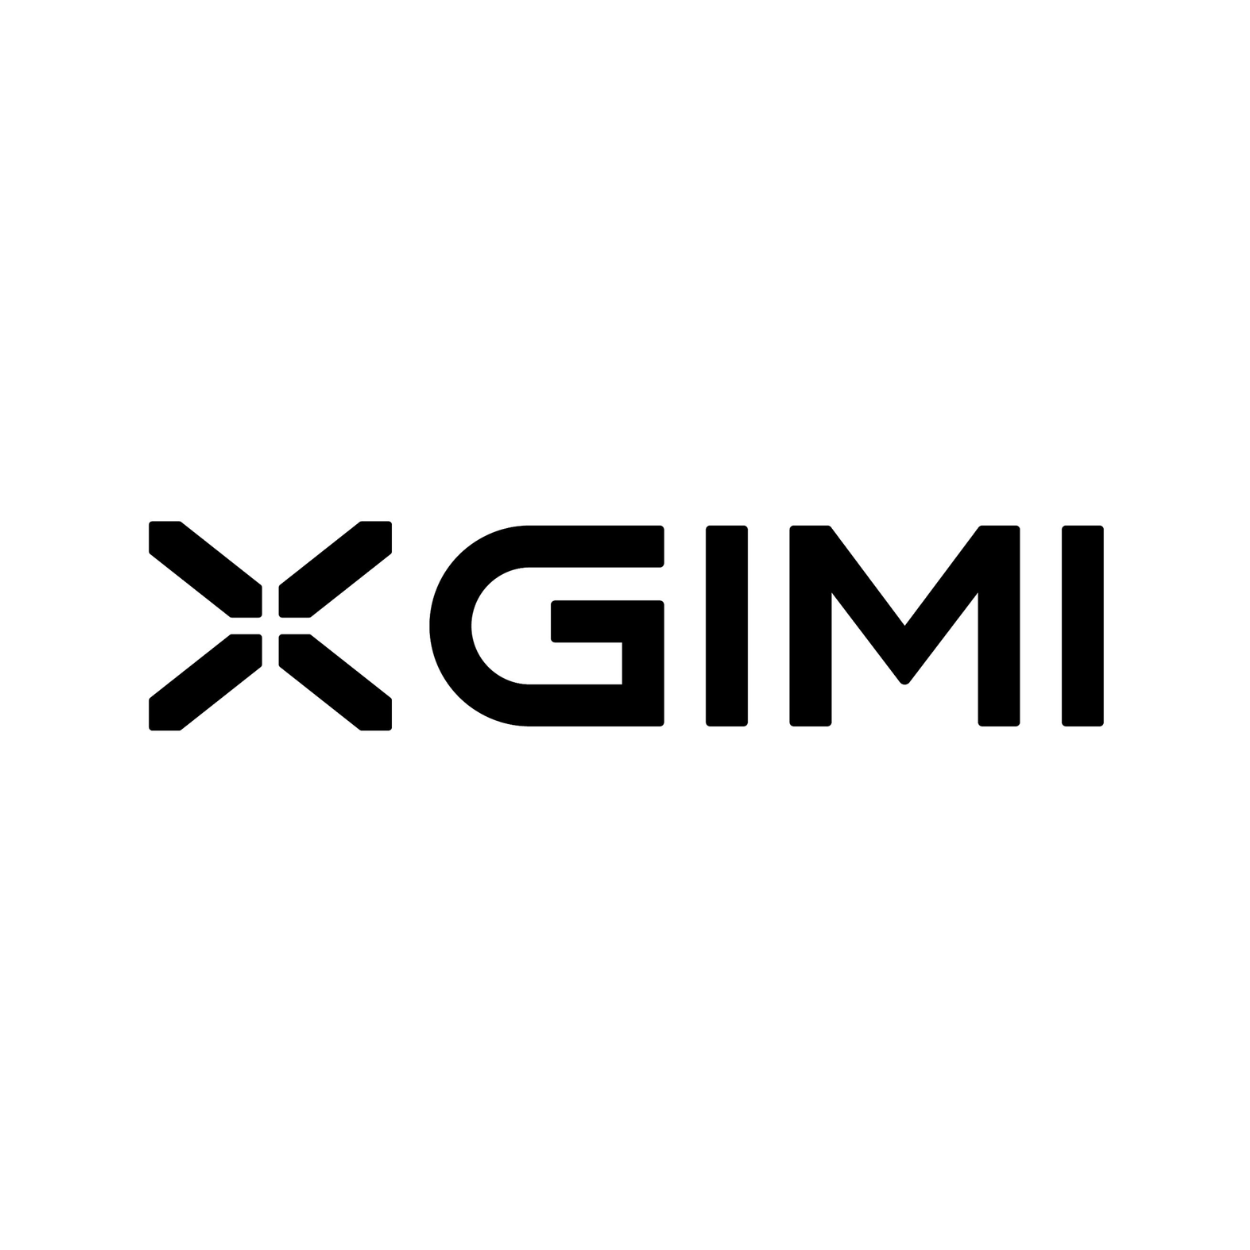 Read more about the article Xgimi